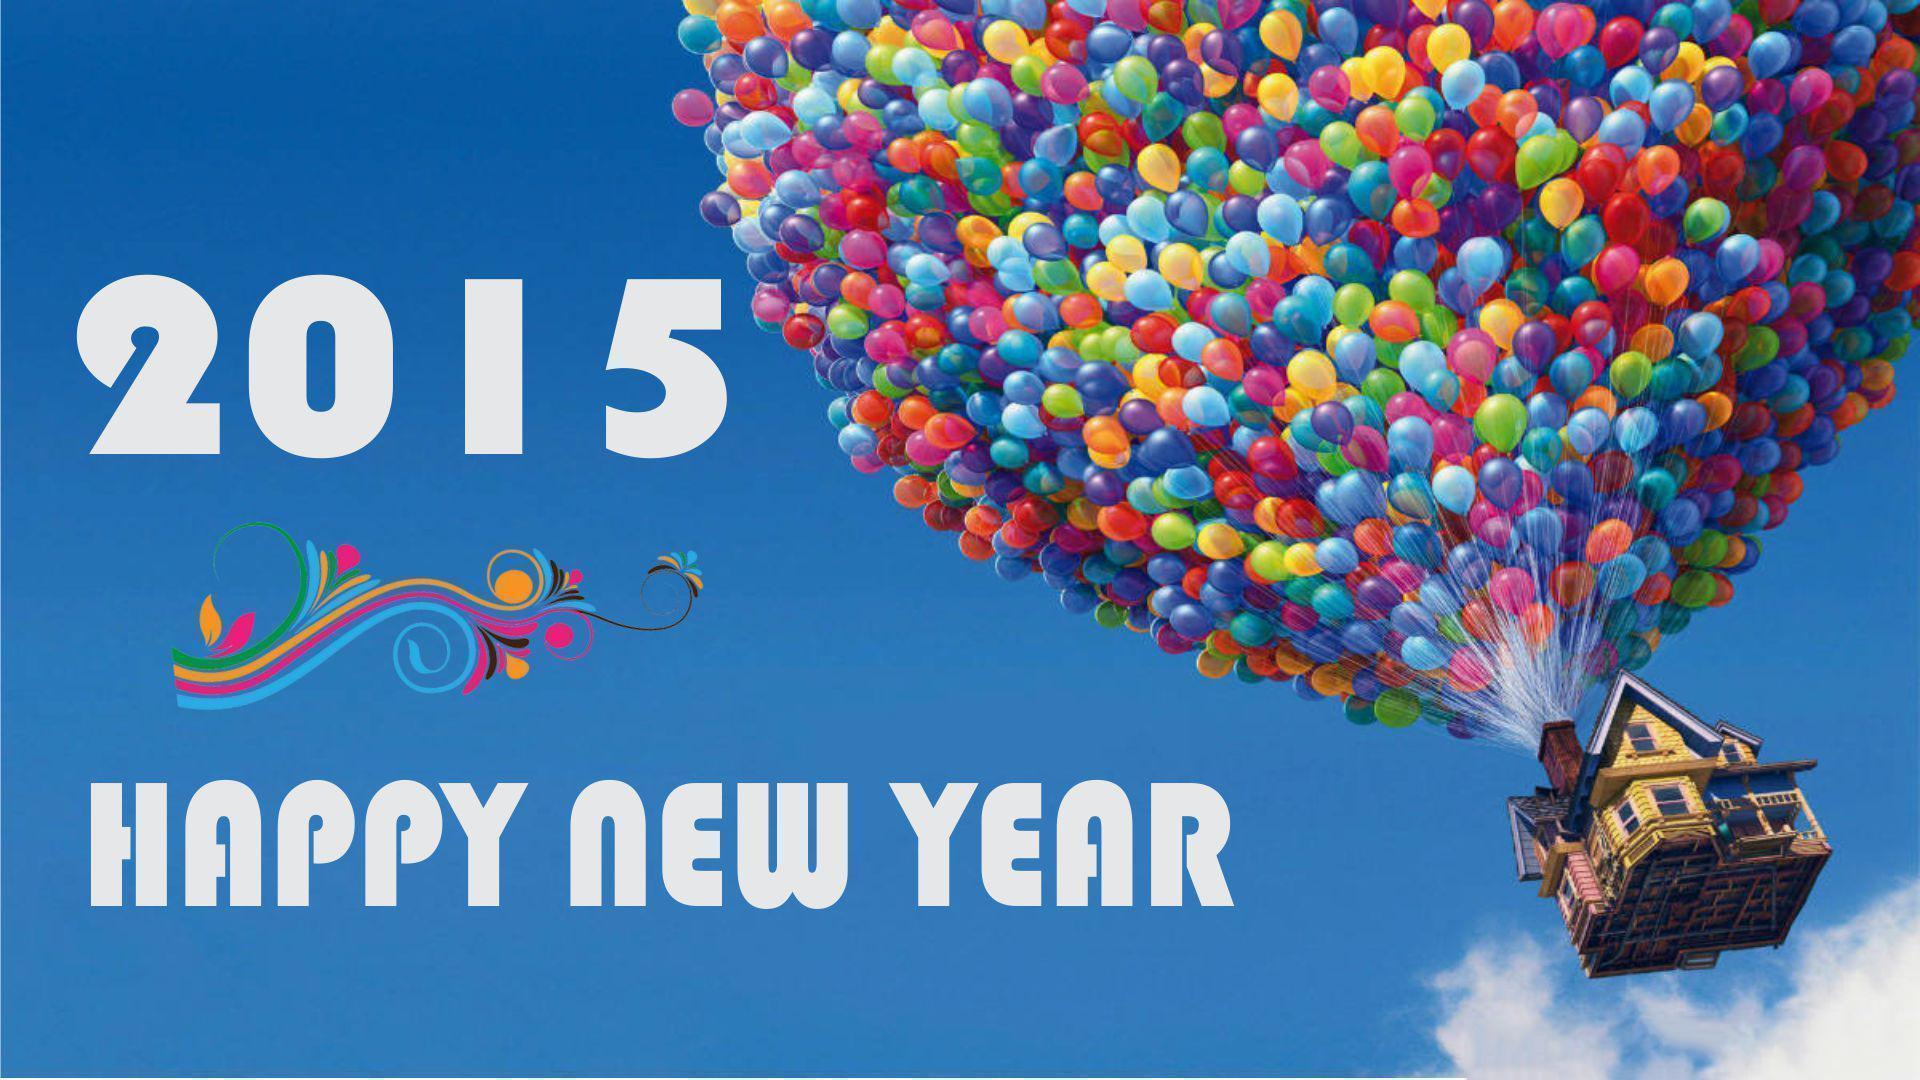 Wallpaper For New Year 2015